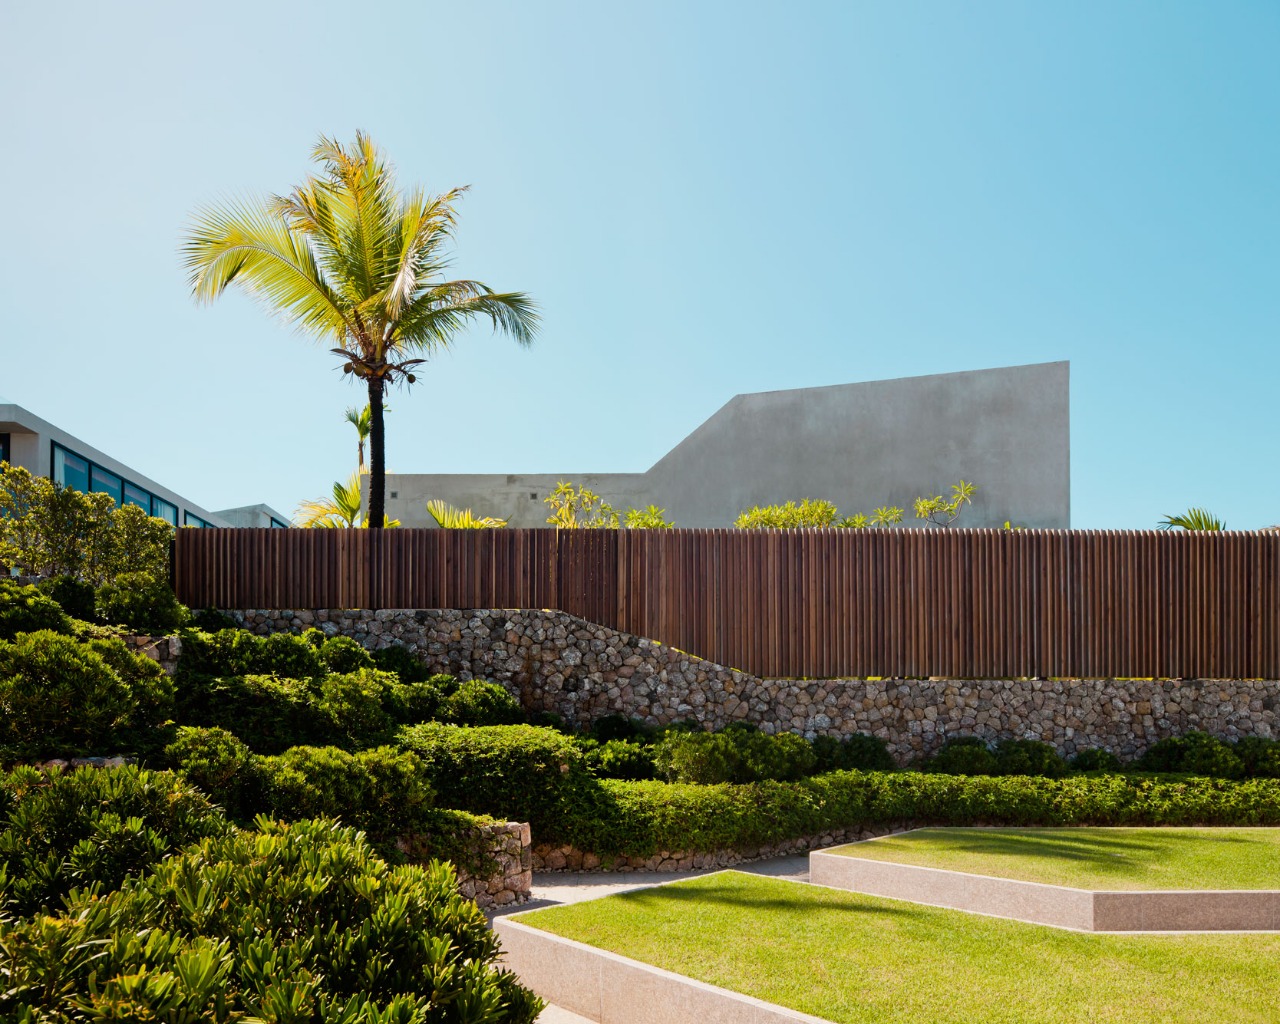 The cubic shape of each villa represents an ever-growing form of flora